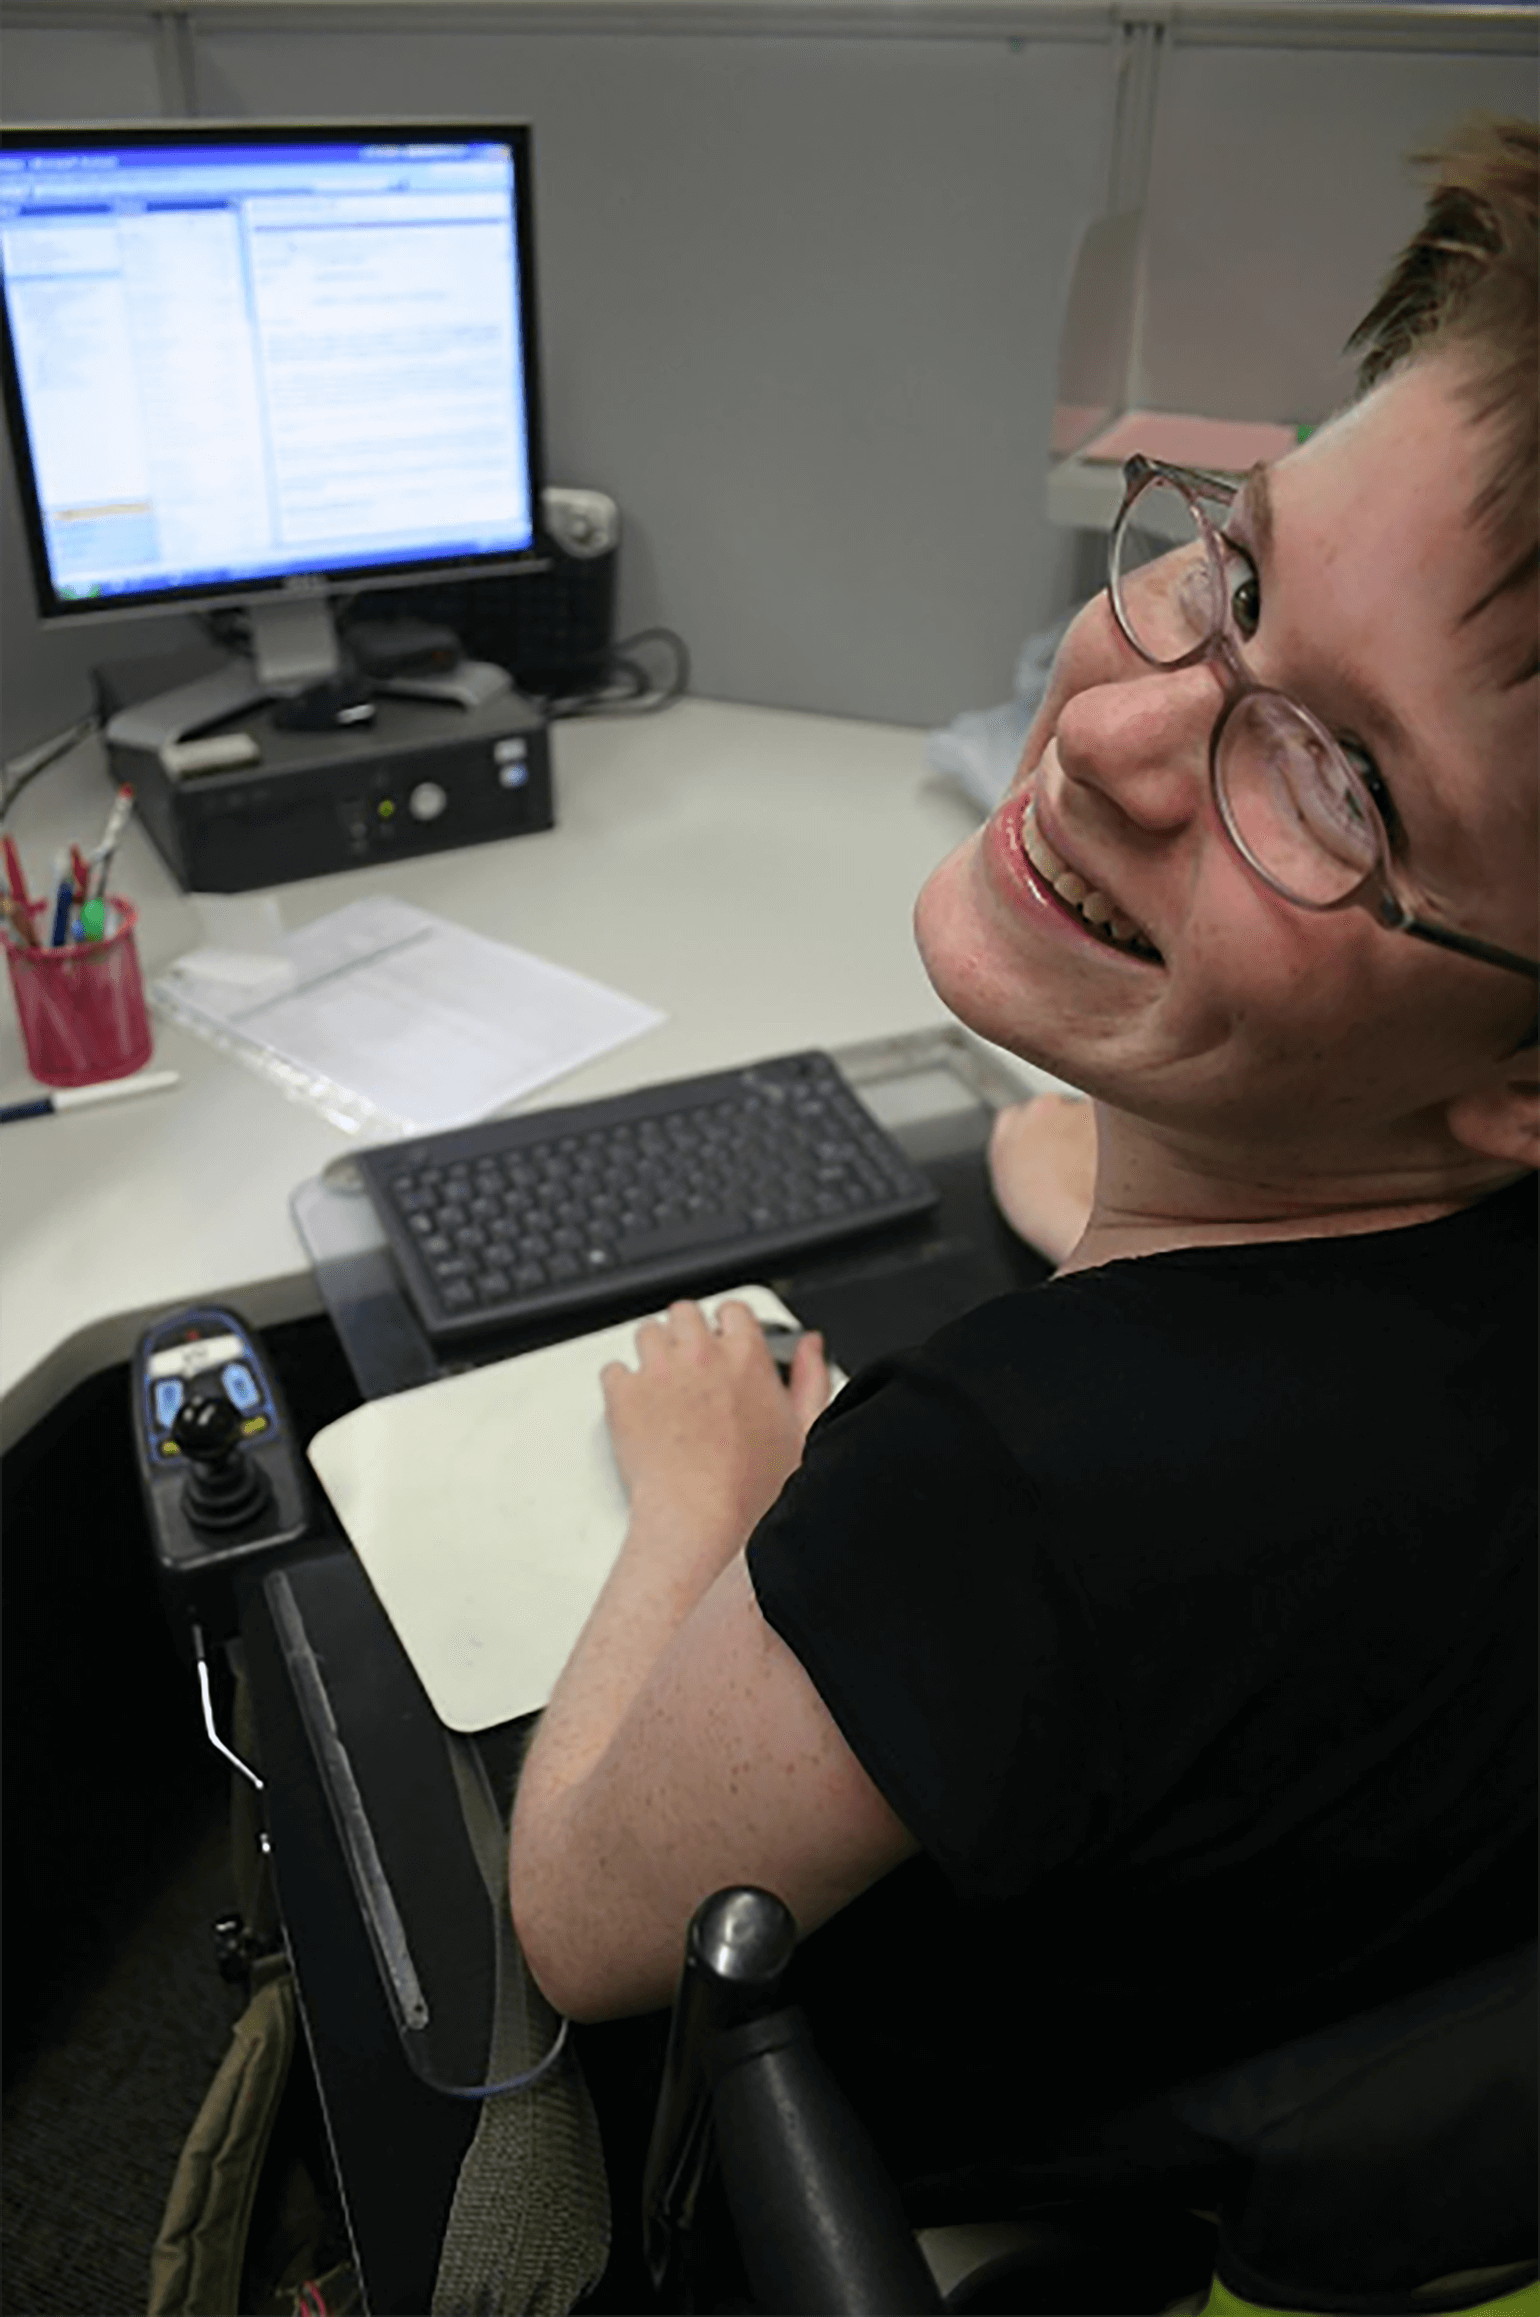 A person with glasses and short, brown hair looks over their shoulder into the camera and smiles. They are working at a desk with a computer on it. They are sitting in a wheelchair with a keyboard on a lap desk in front of them.